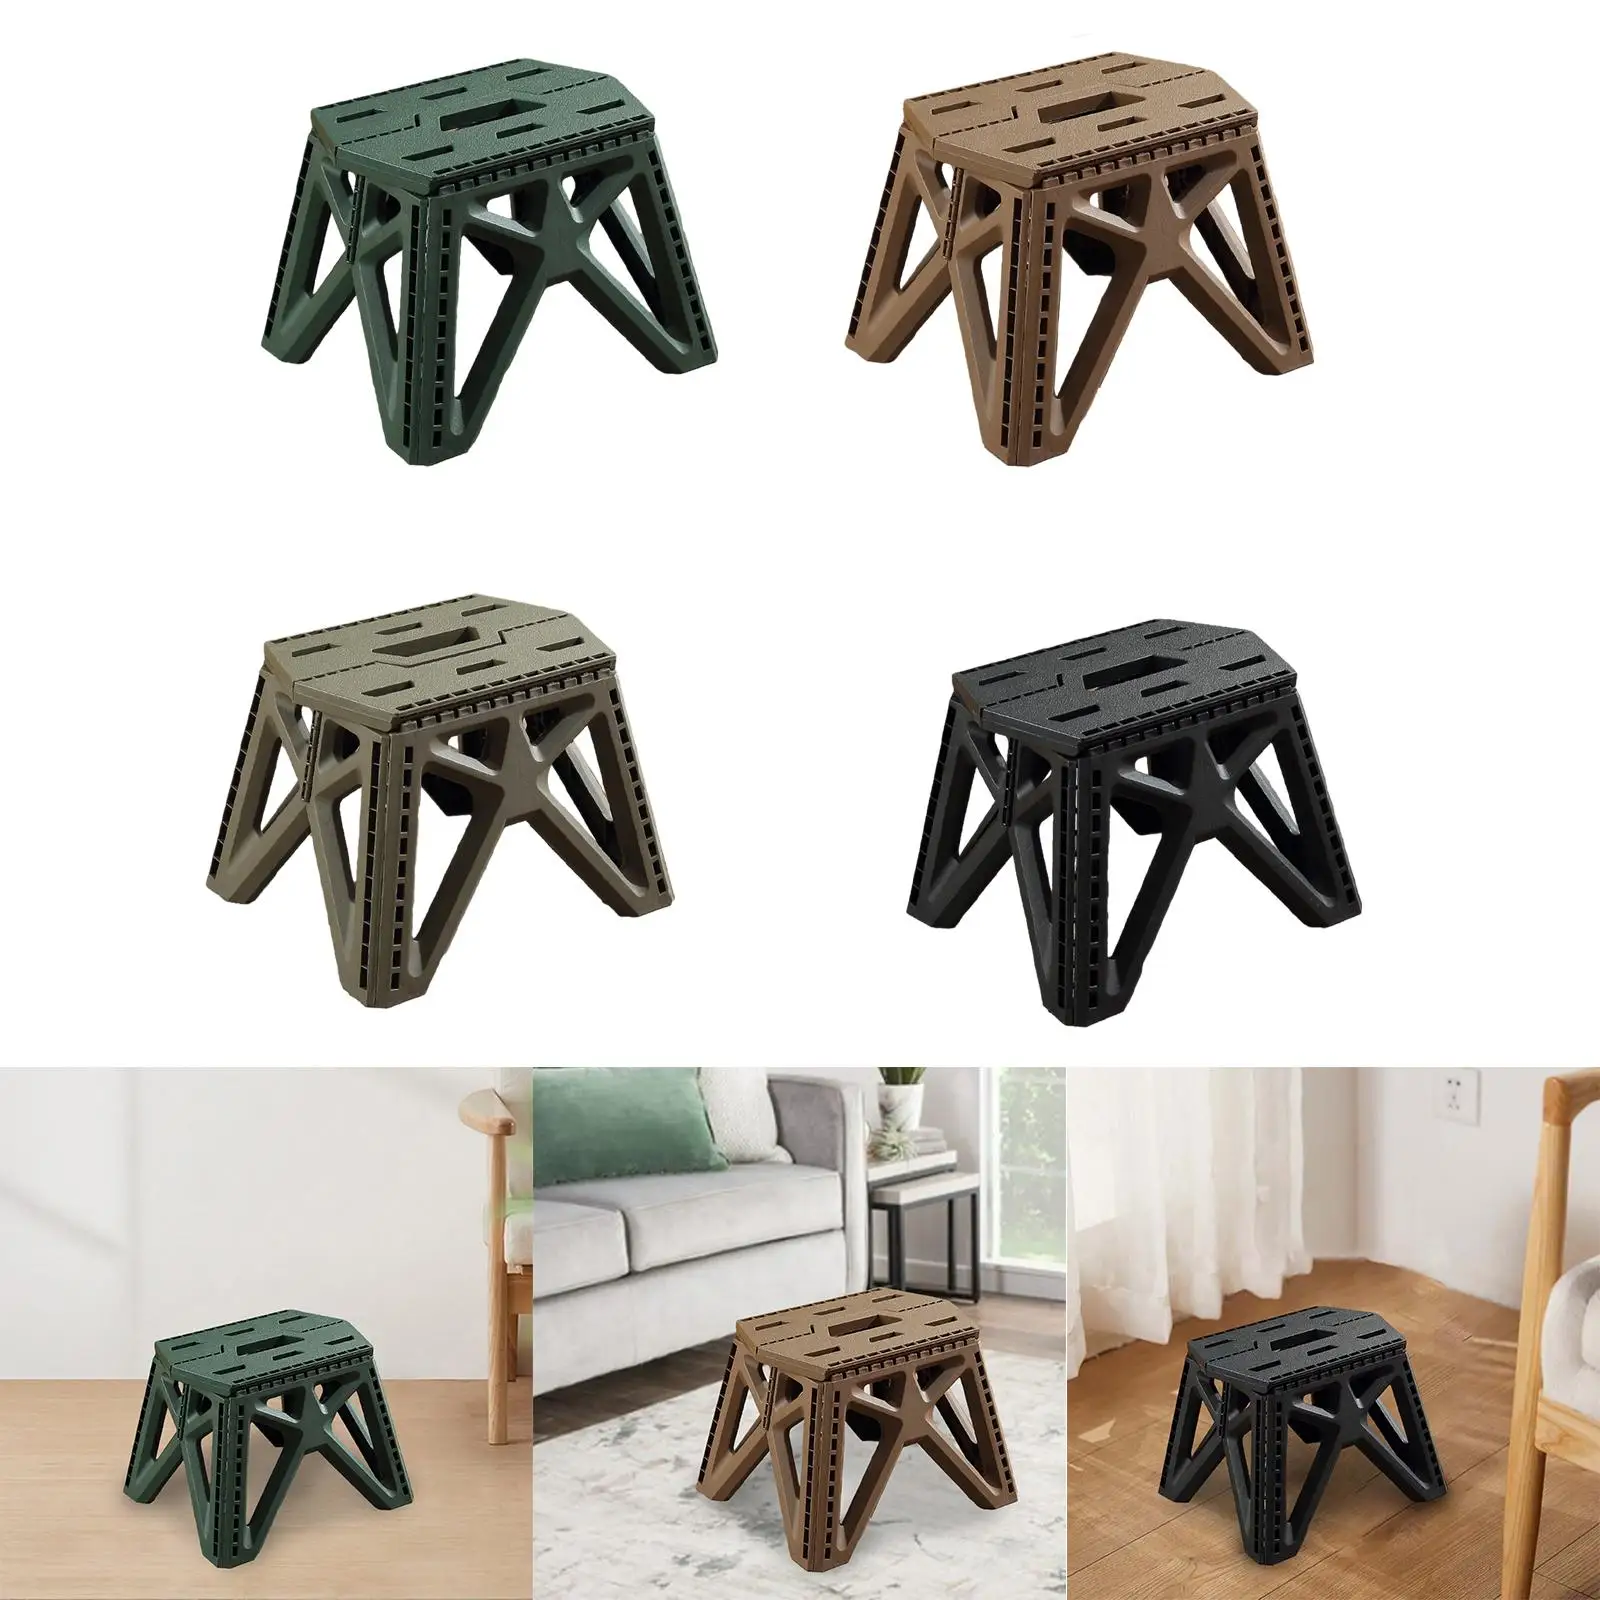 Folding Camping Stool, Collapsible Stool Foldable Stool, Camping Chair for Beach Garden Fishing Hiking Backpacking